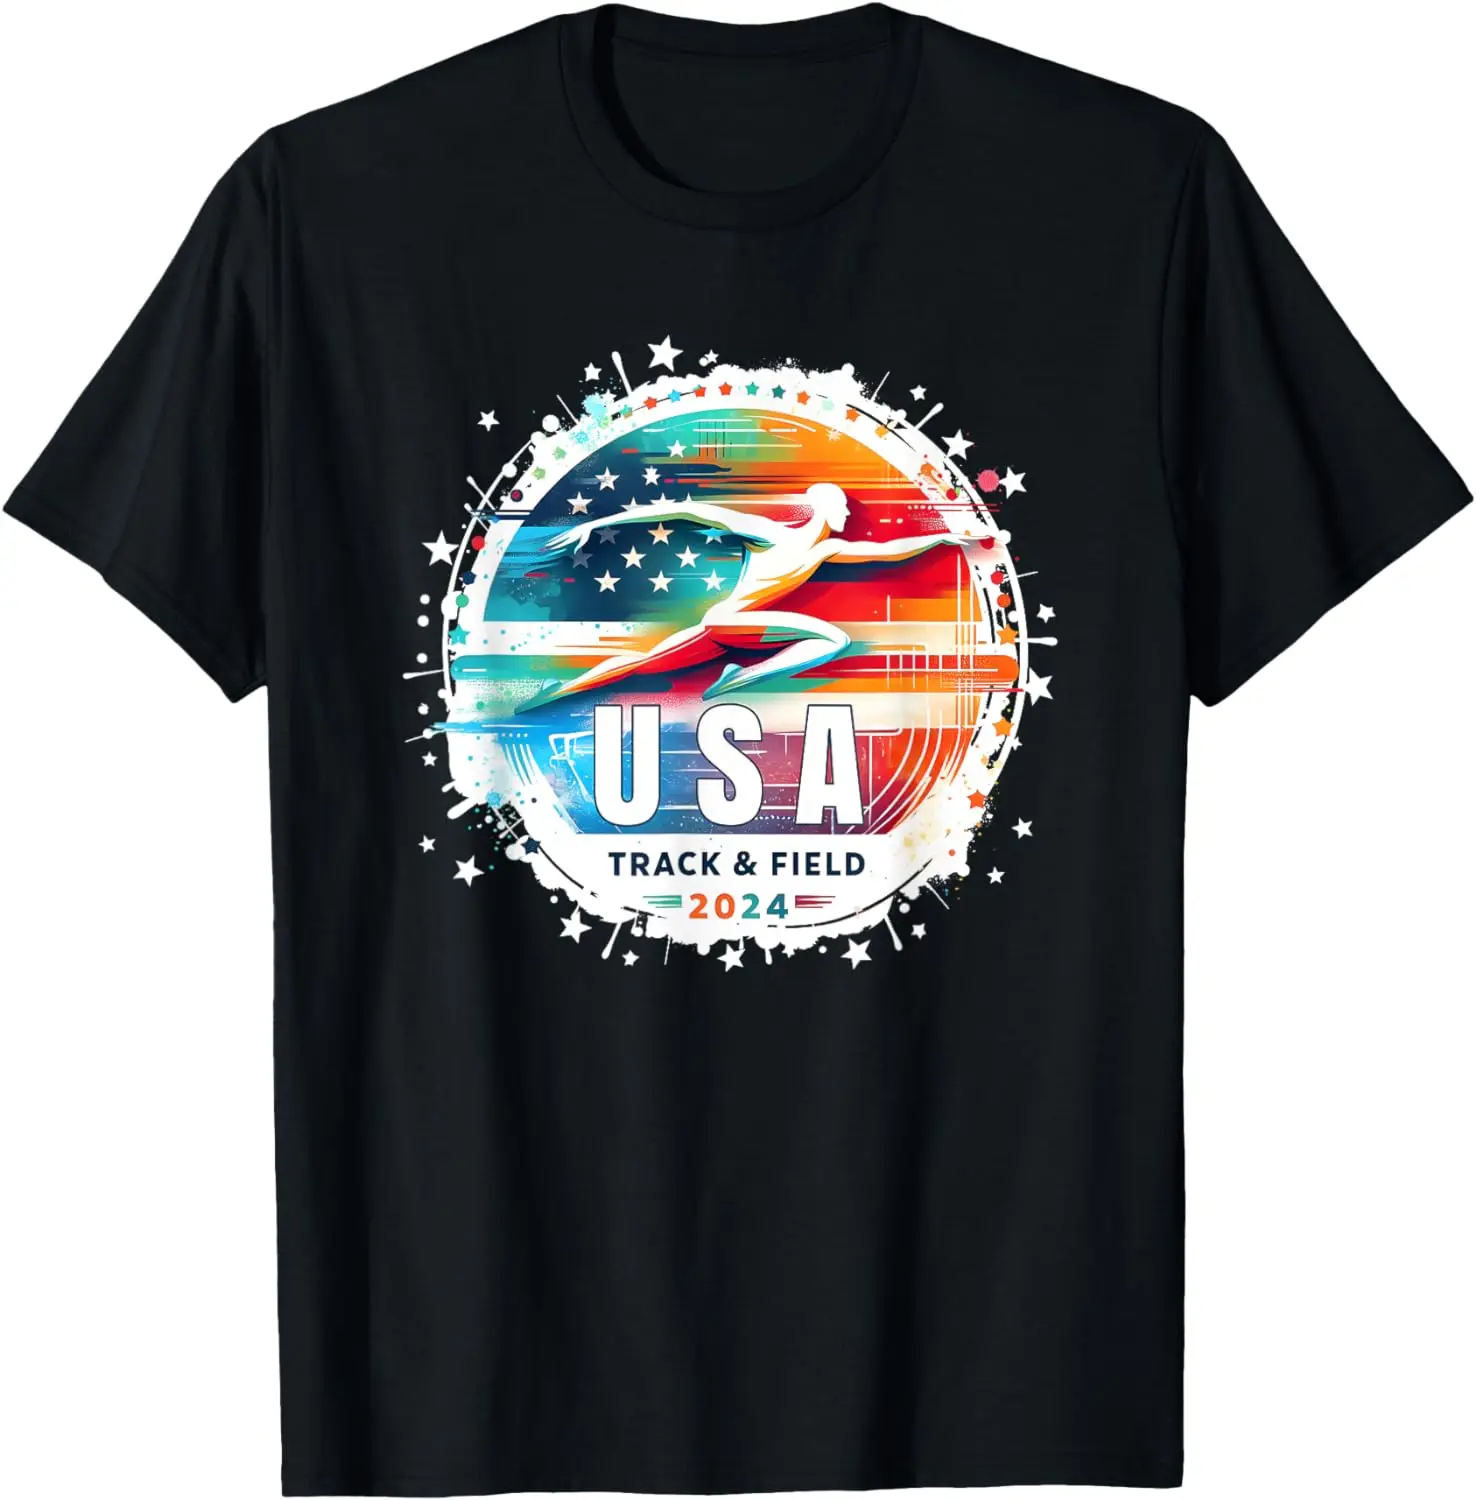 

USA 2024 Go United States America 2024 USA Track and Field T-Shirt